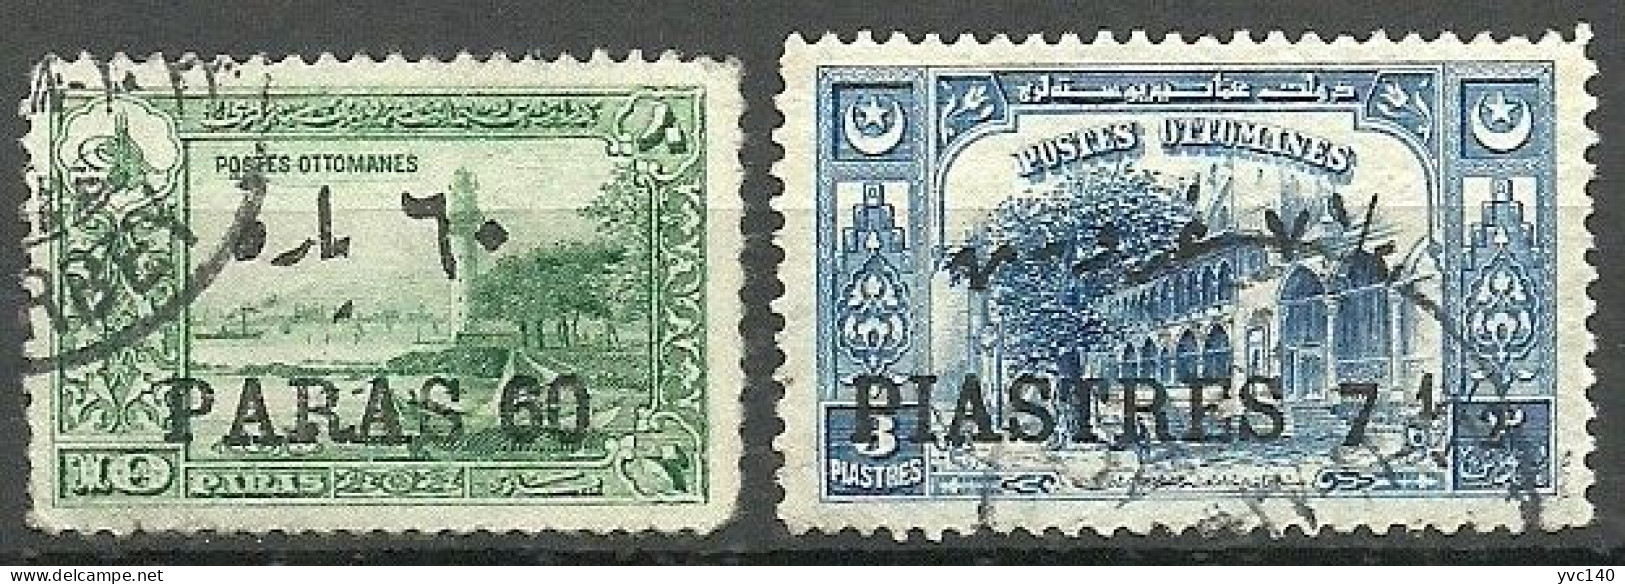 Turkey; 1921 Surcharged Postage Stamps - Used Stamps